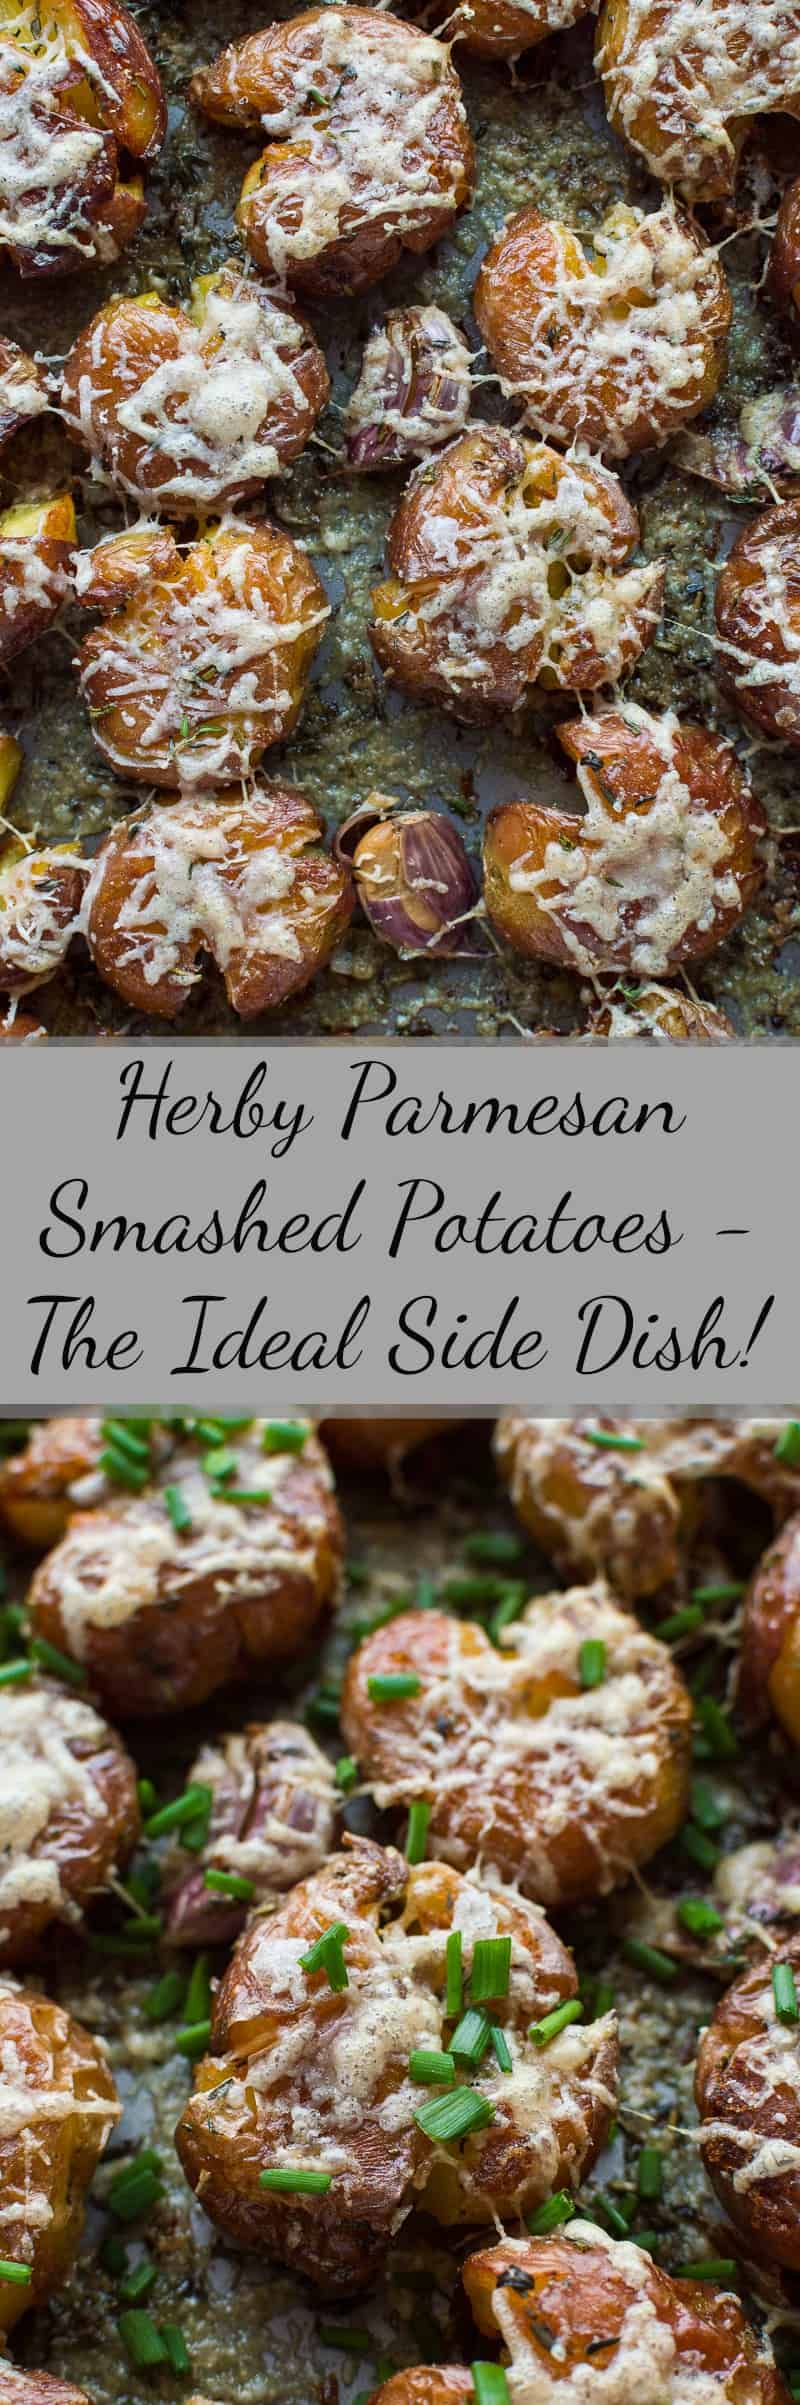 Herby parmesan smashed potatoes - soft on the inside, crispy on the outside, these are the ultimate side-dish!